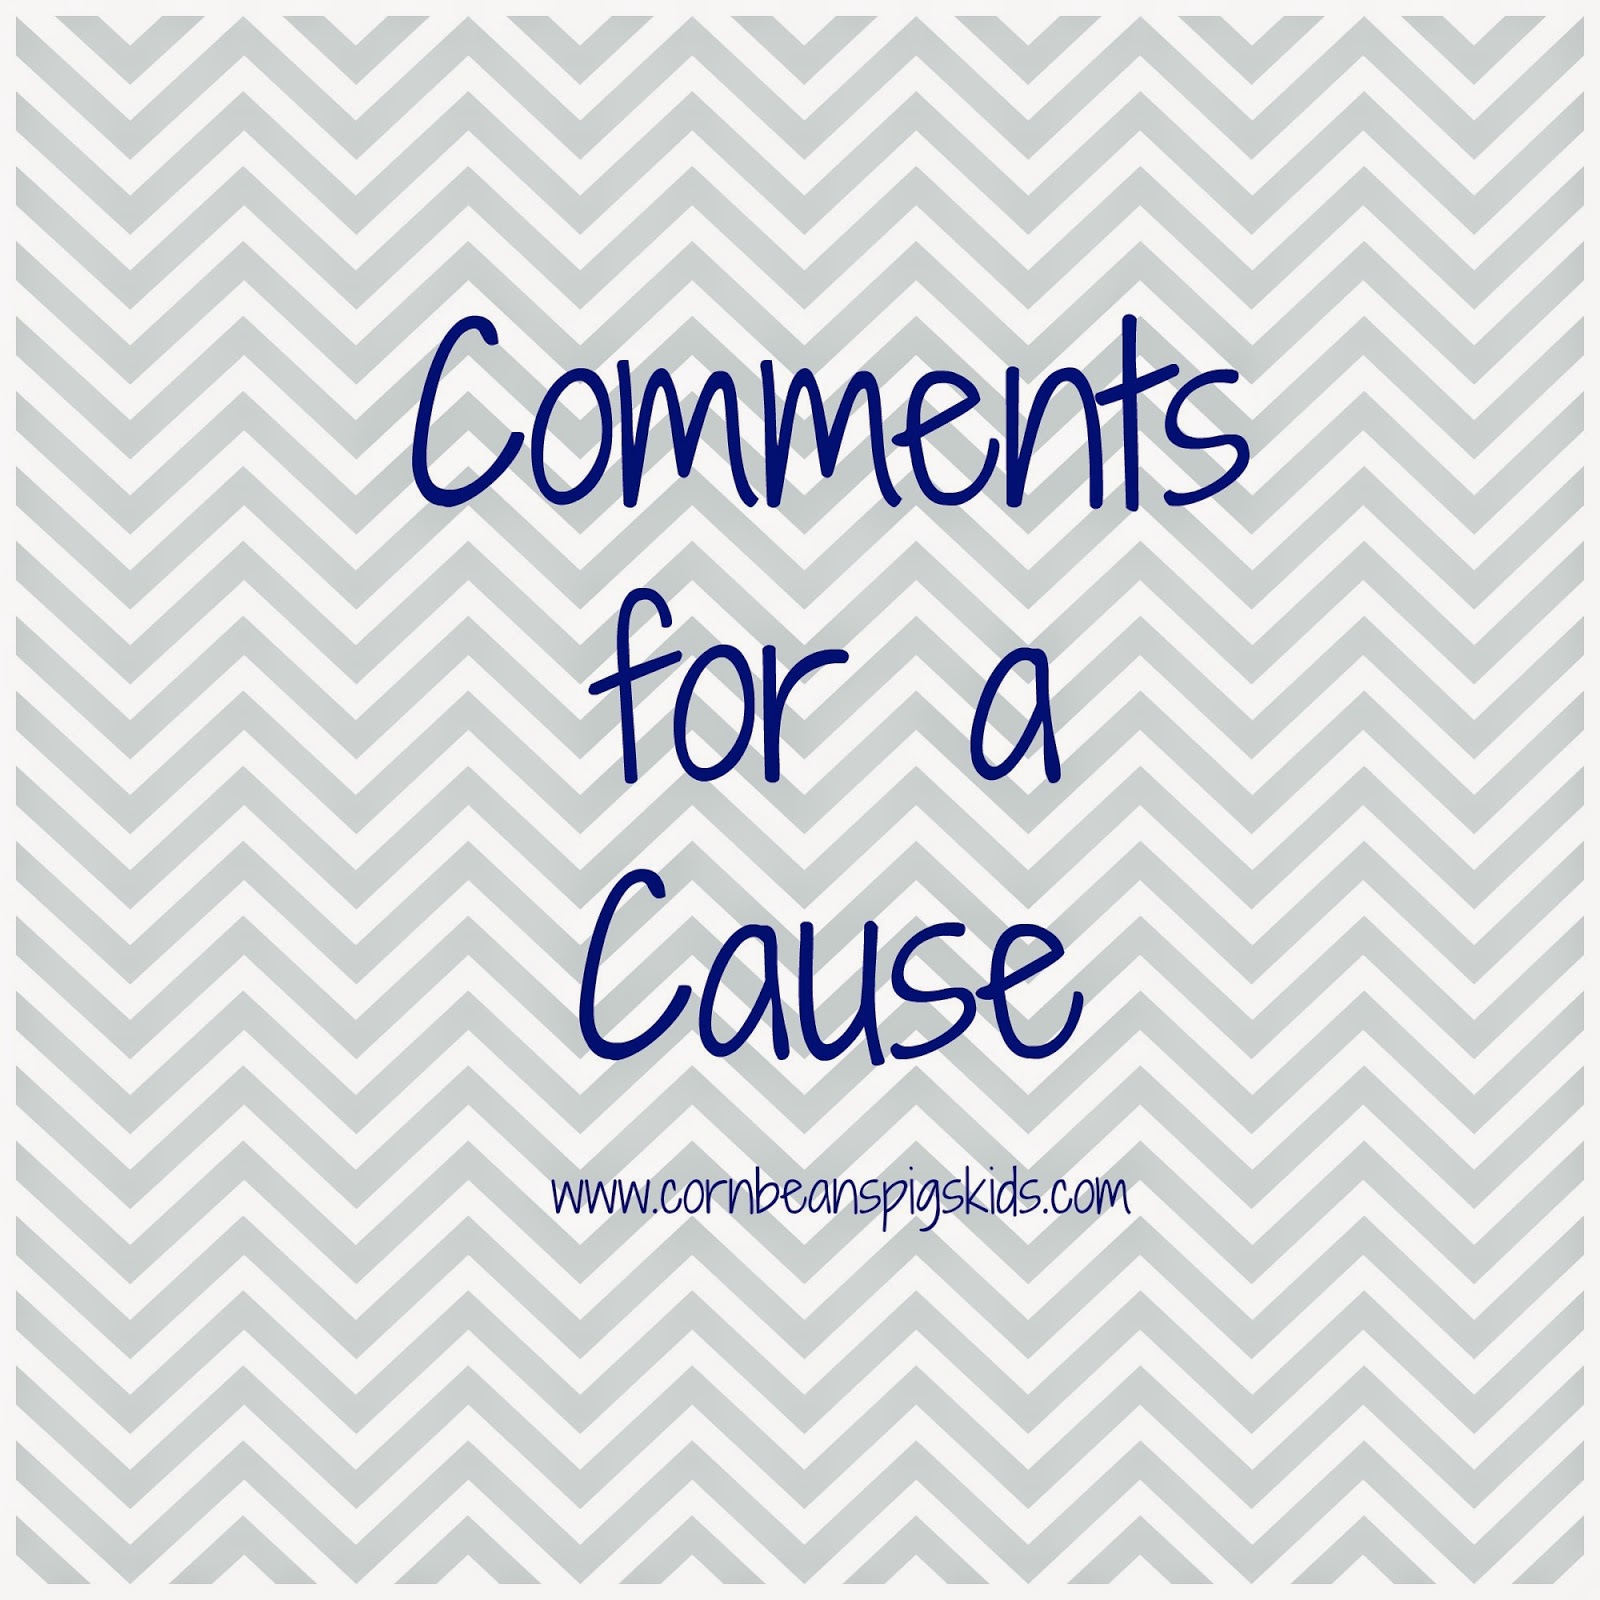 Comments for a Cause April 2015 - For each comment on Corn, Beans, Pigs & Kids blog all April long $0.50 will be donated to the Caring Pregnancy Center